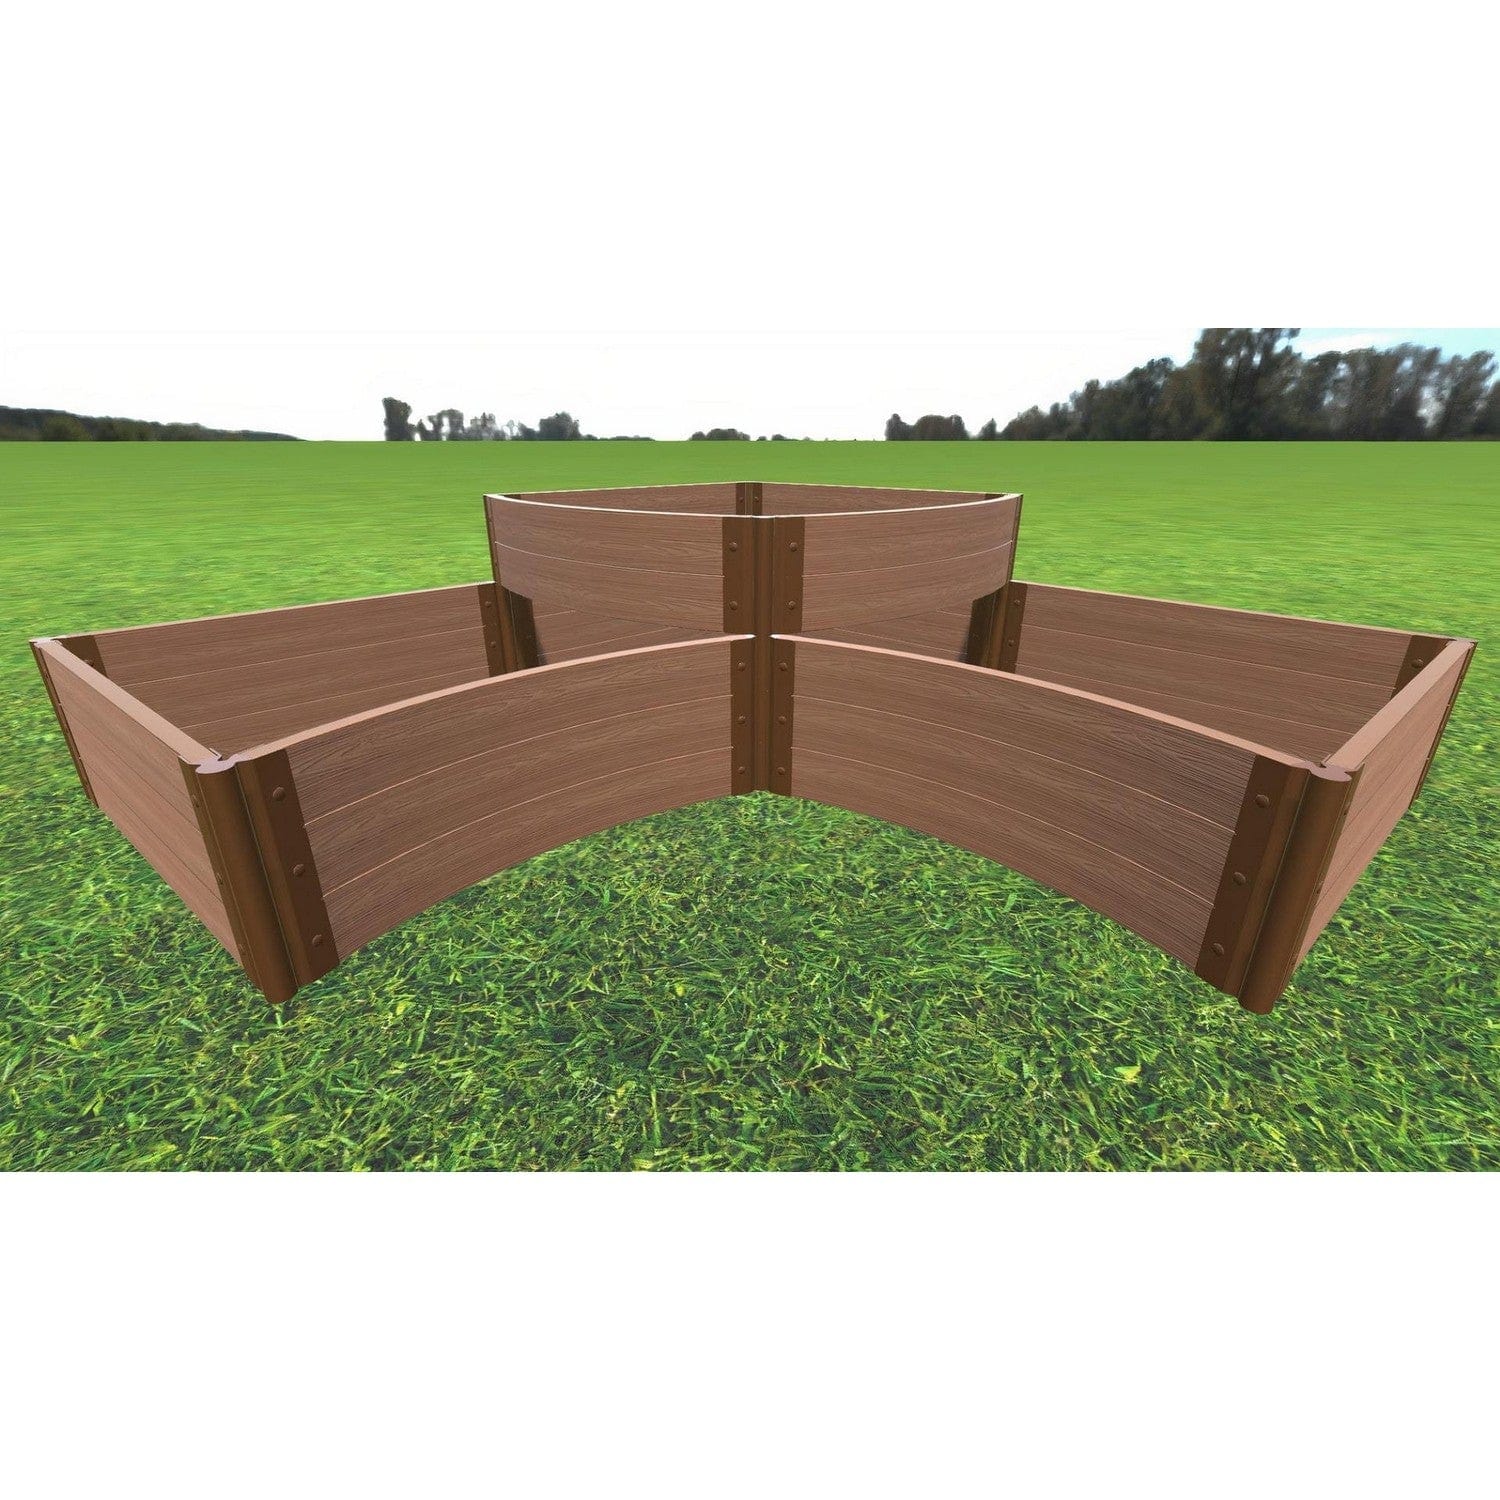 Frame It All Gardening Accessories Frame It All | Tool-Free Teardrop Curved Corner Raised Garden Bed (2-Tier) 8' X 8' X 16.5" - Classic Sienna - 2" Profile 800003009